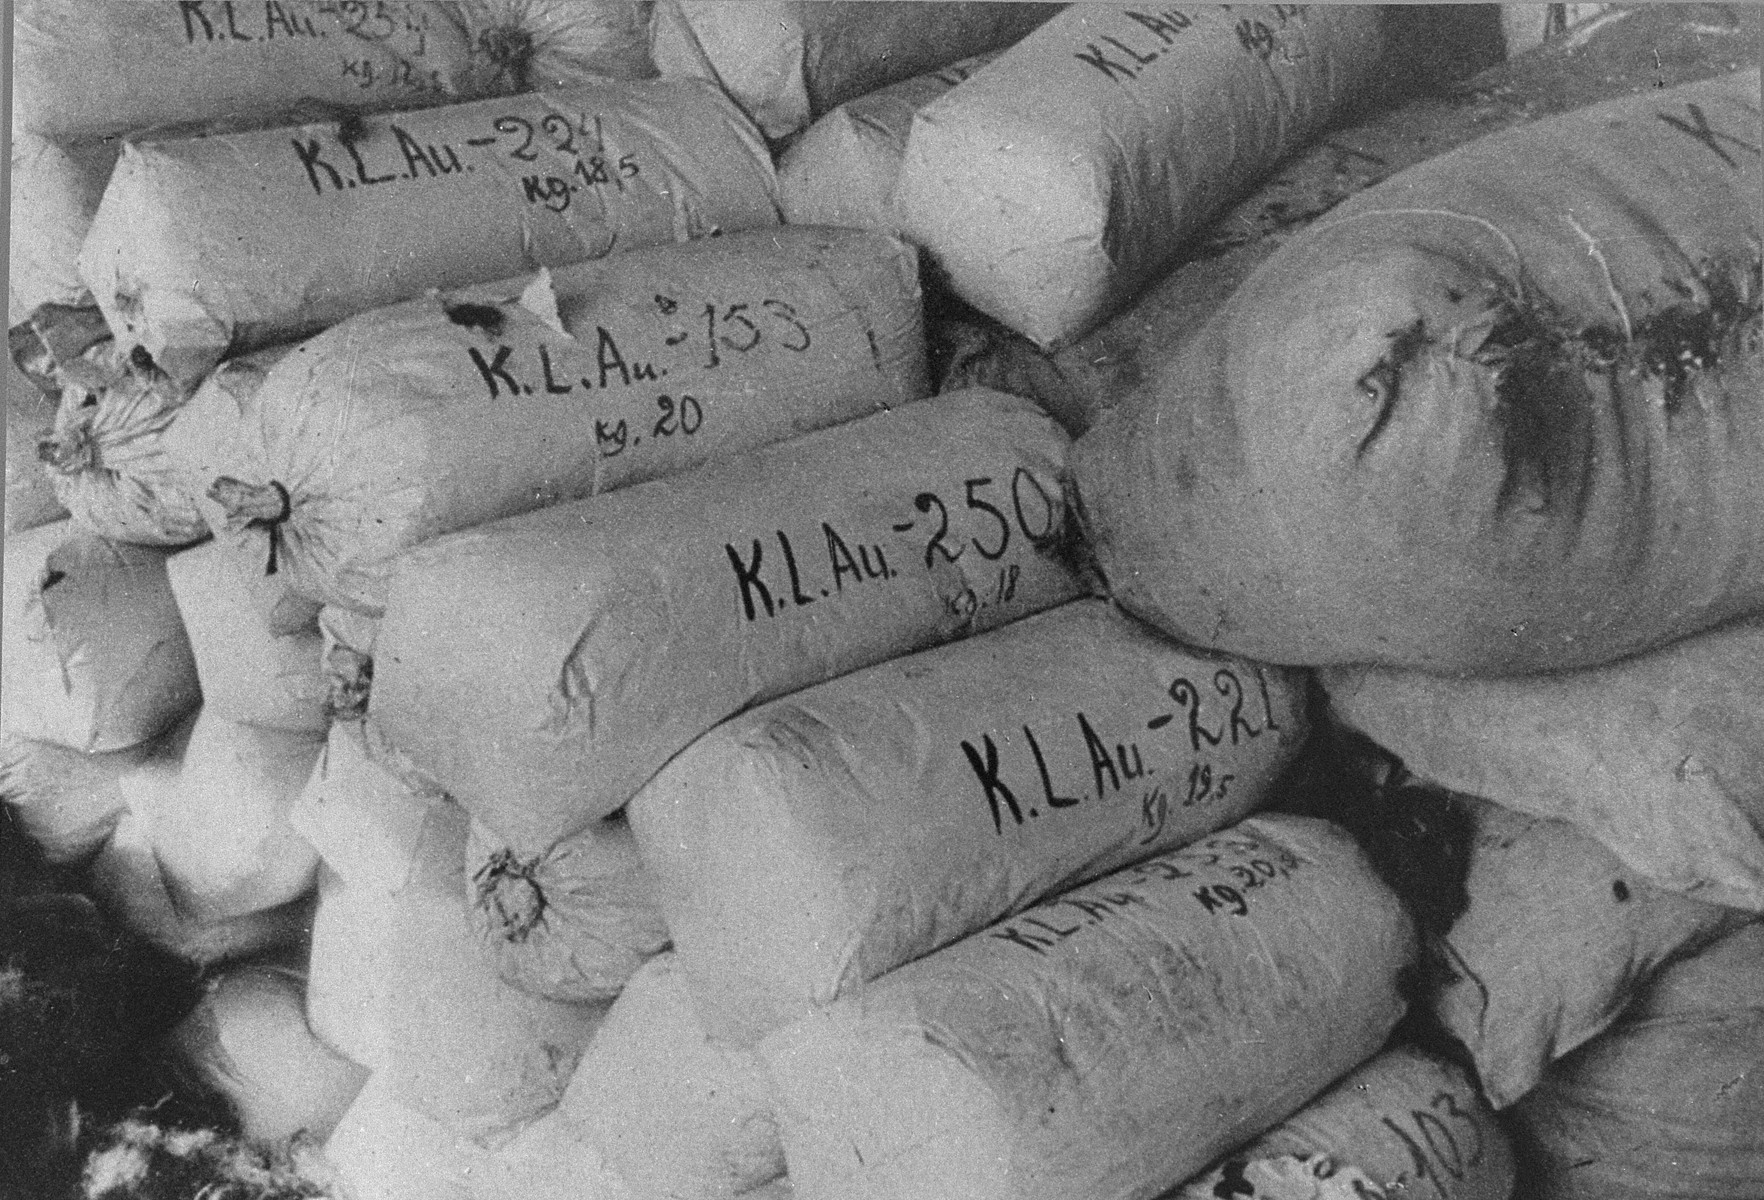 Bales of hair from female prisoners, numbered for shipment to Germany, found at the liberation of Auschwitz.